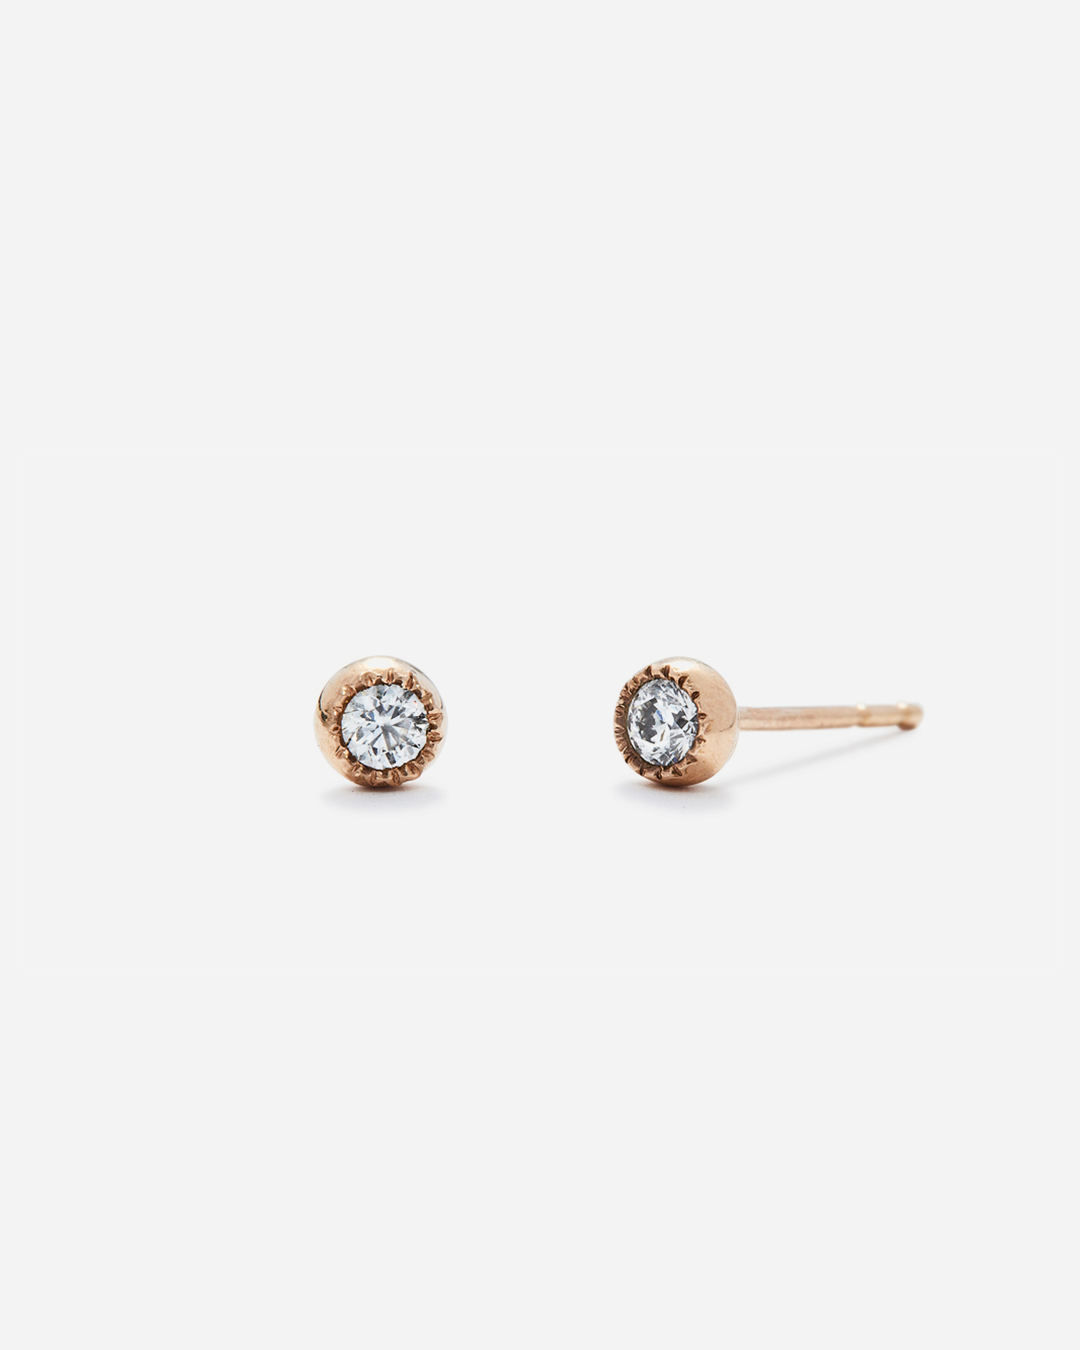 Melee Ball / White Diamonds Studs By Hiroyo in earrings Category